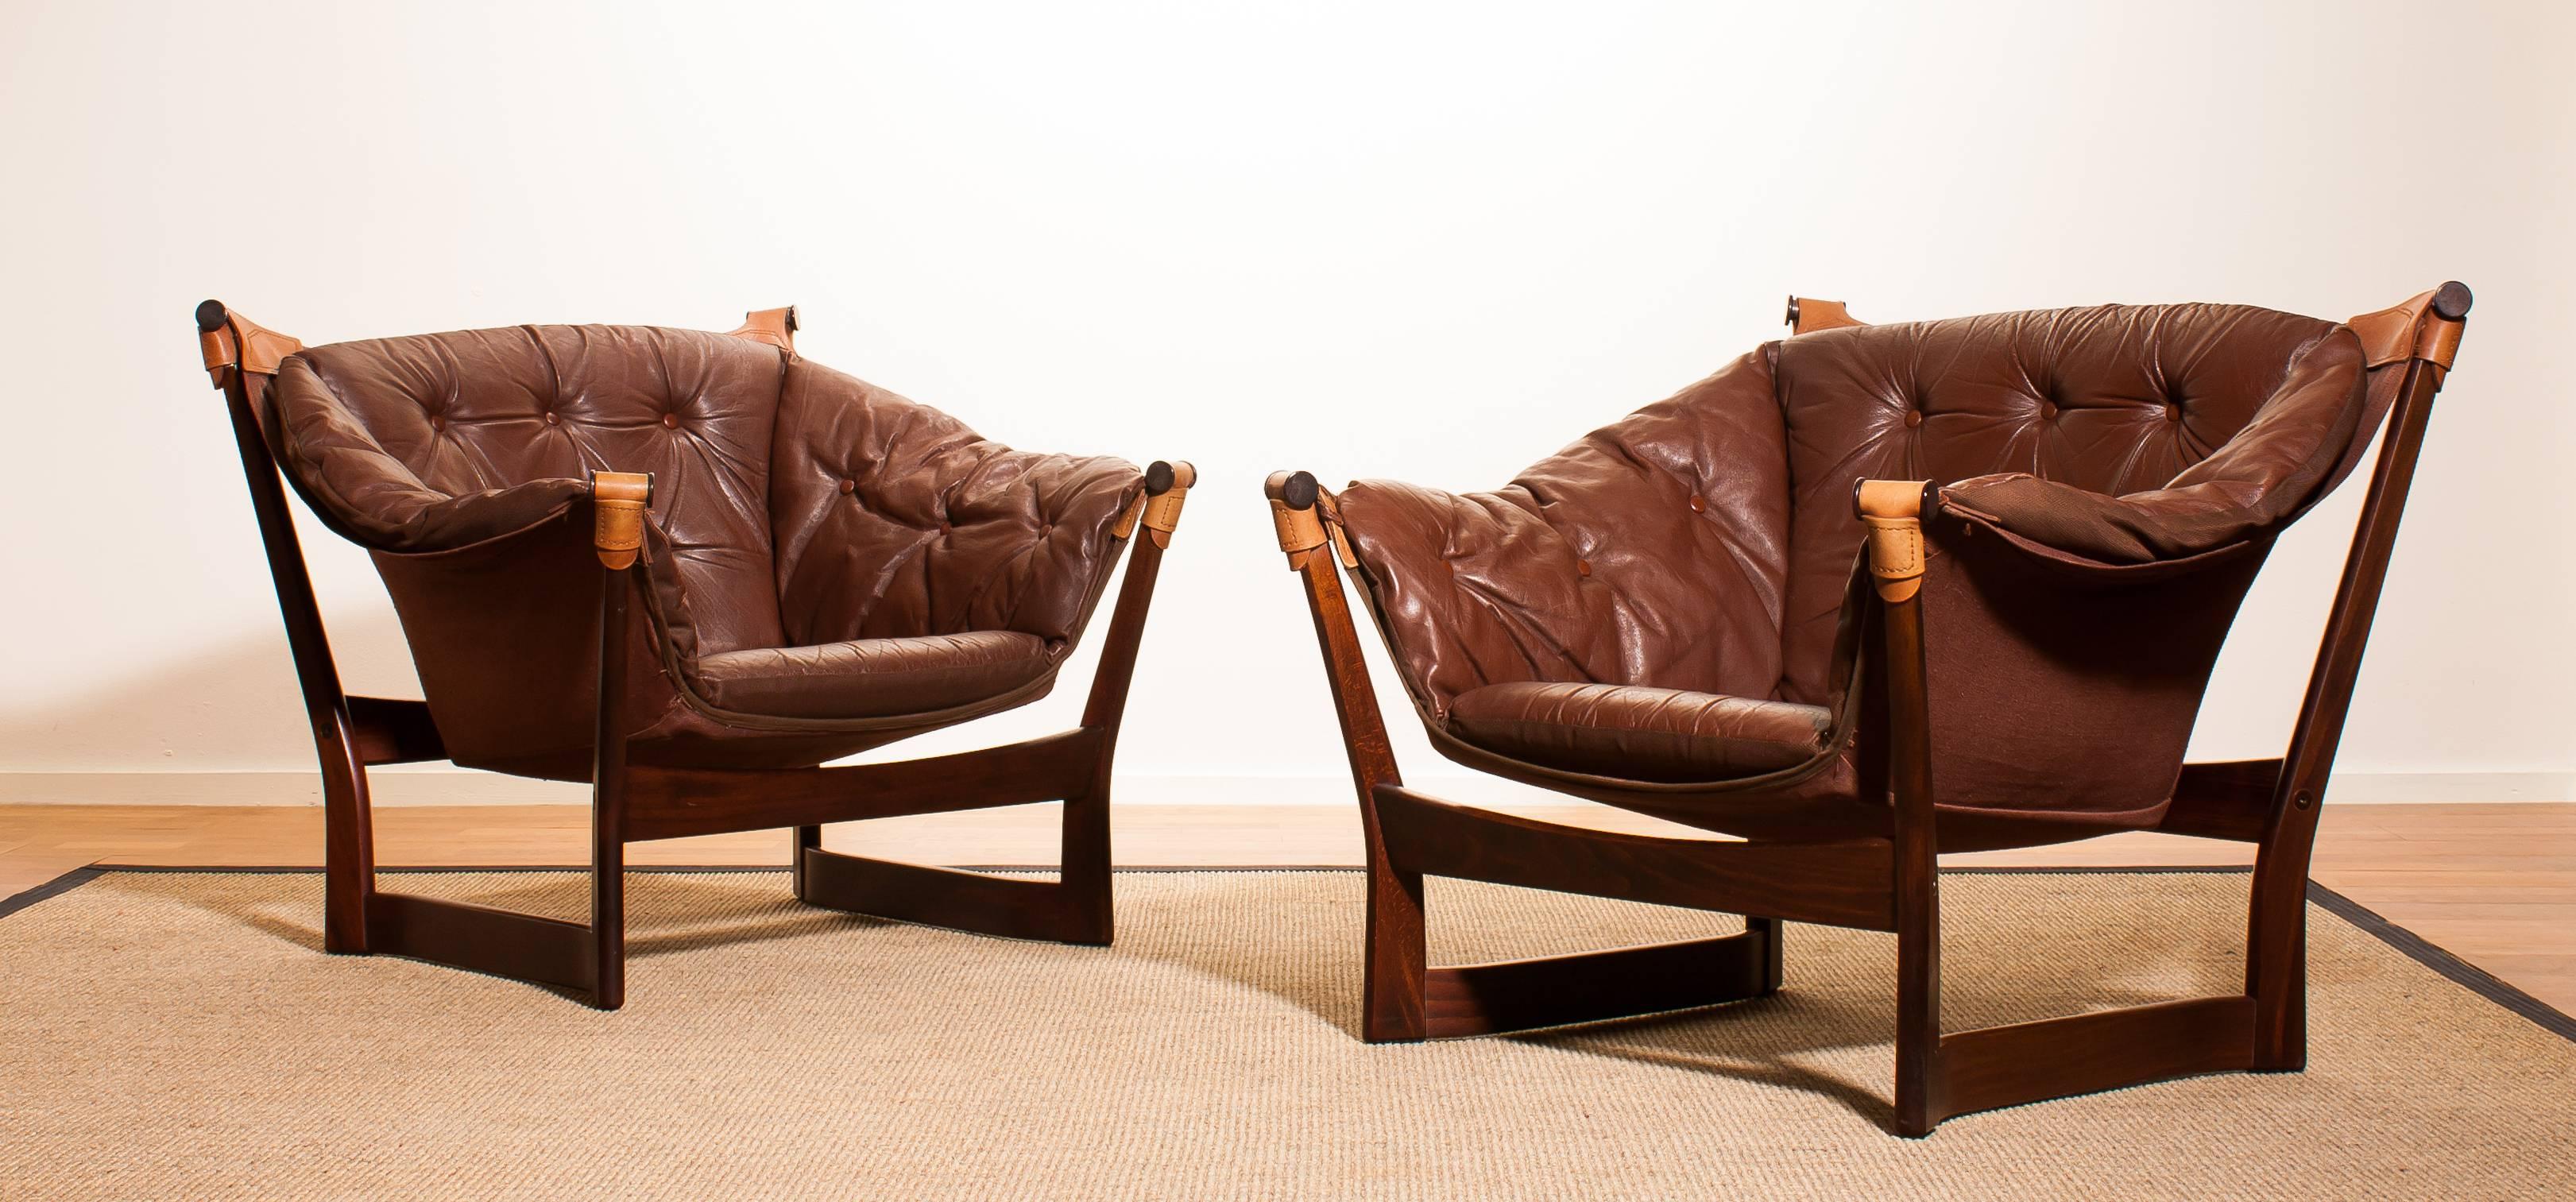 Norwegian 1950s, Teak and Leather Pair 'Trega' Chairs by Tormod Alnaes for Sørliemøbler